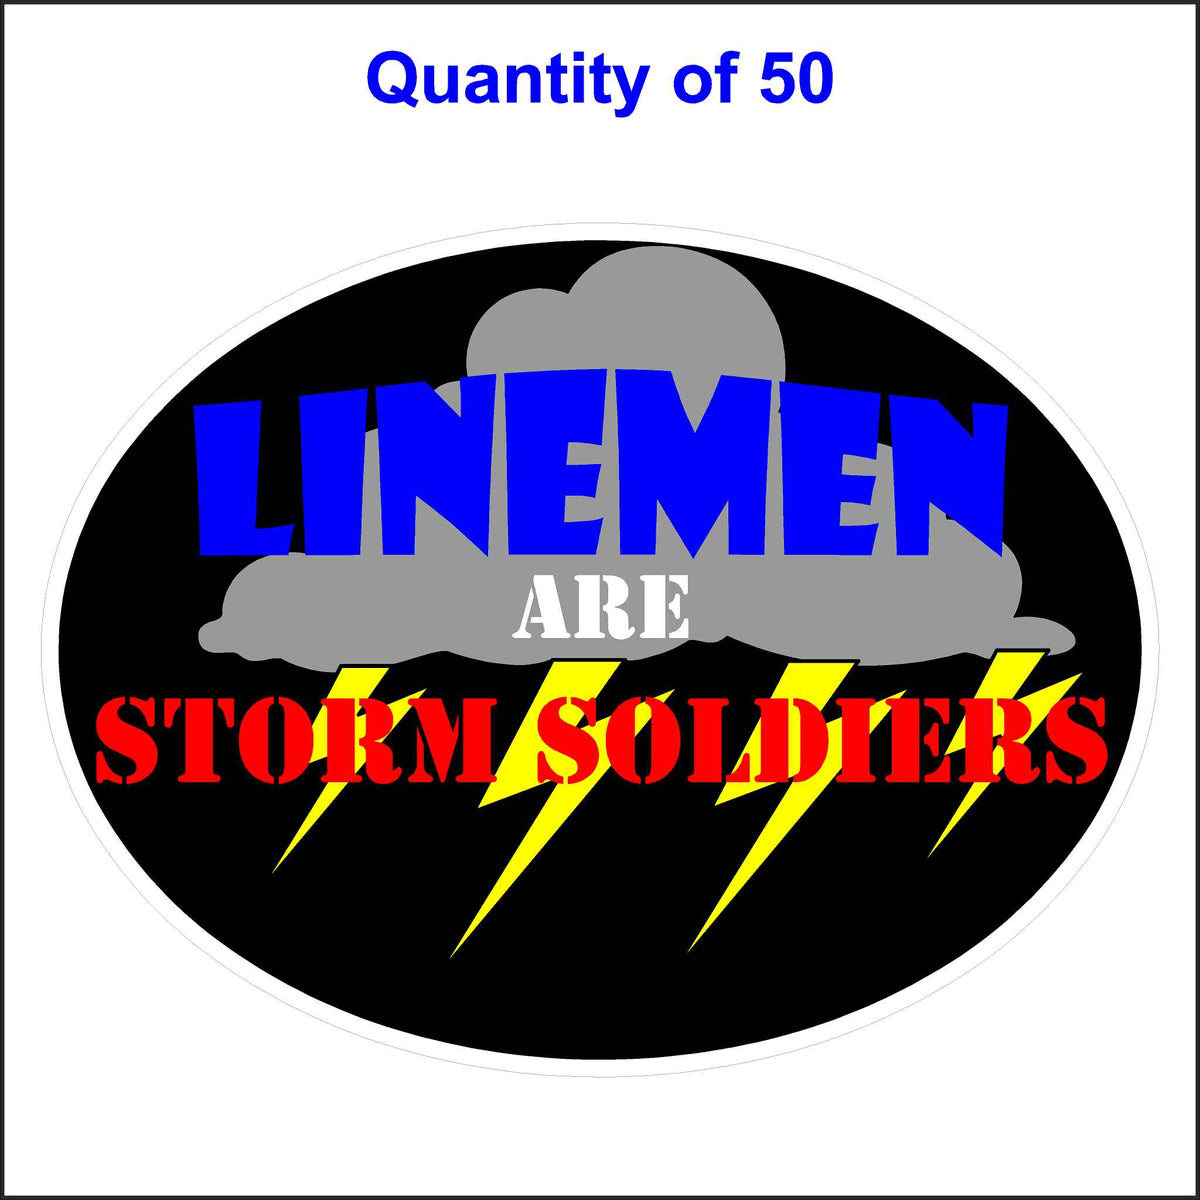 Black Lineman Are Storm Soldiers Stickers. 50 Quantity.